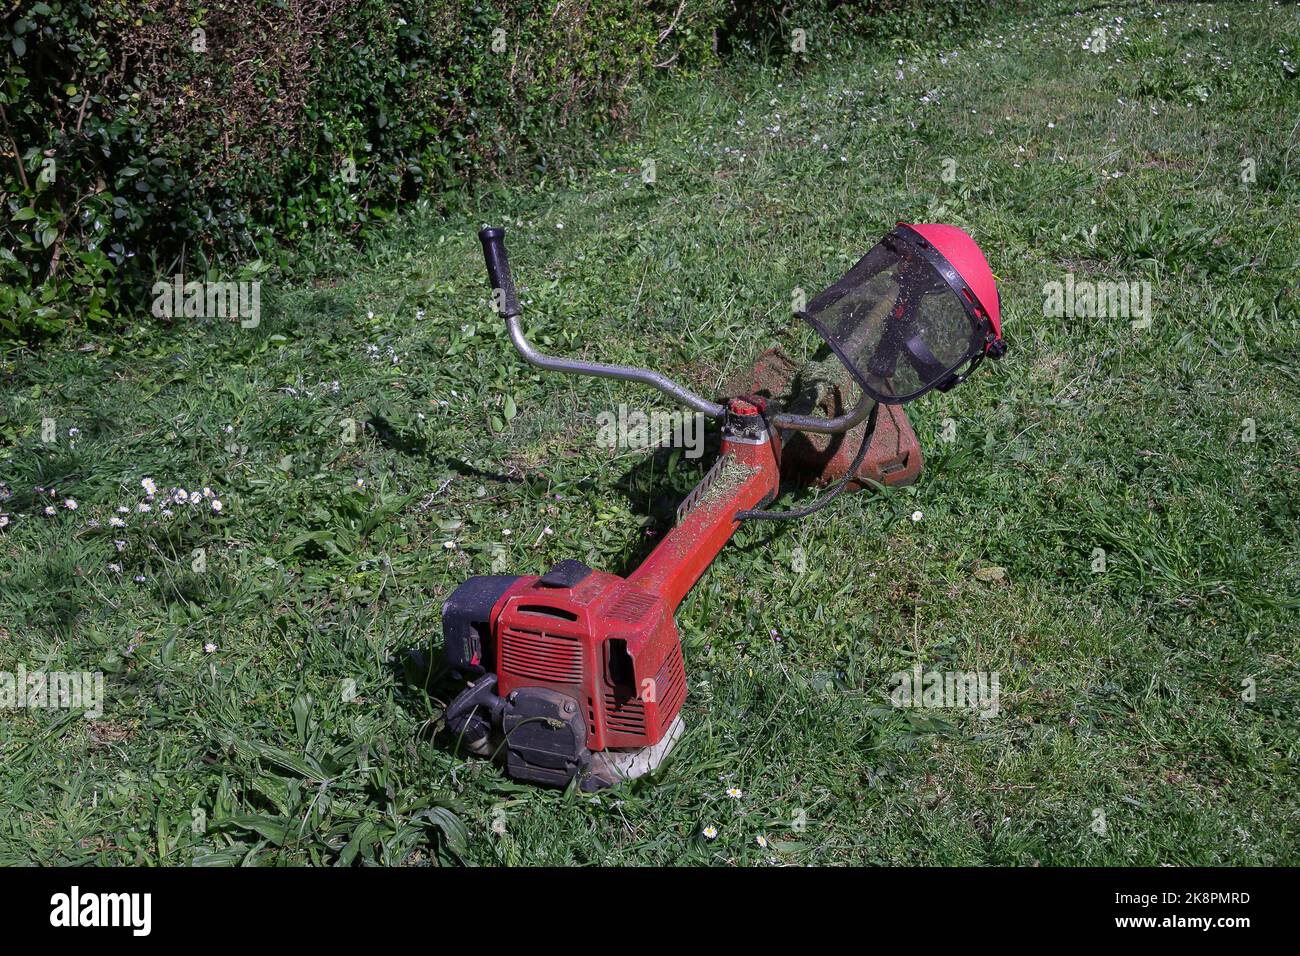 A closeup of a brushcutter, a clearing saw on the lawn in the garden. Stock Photo